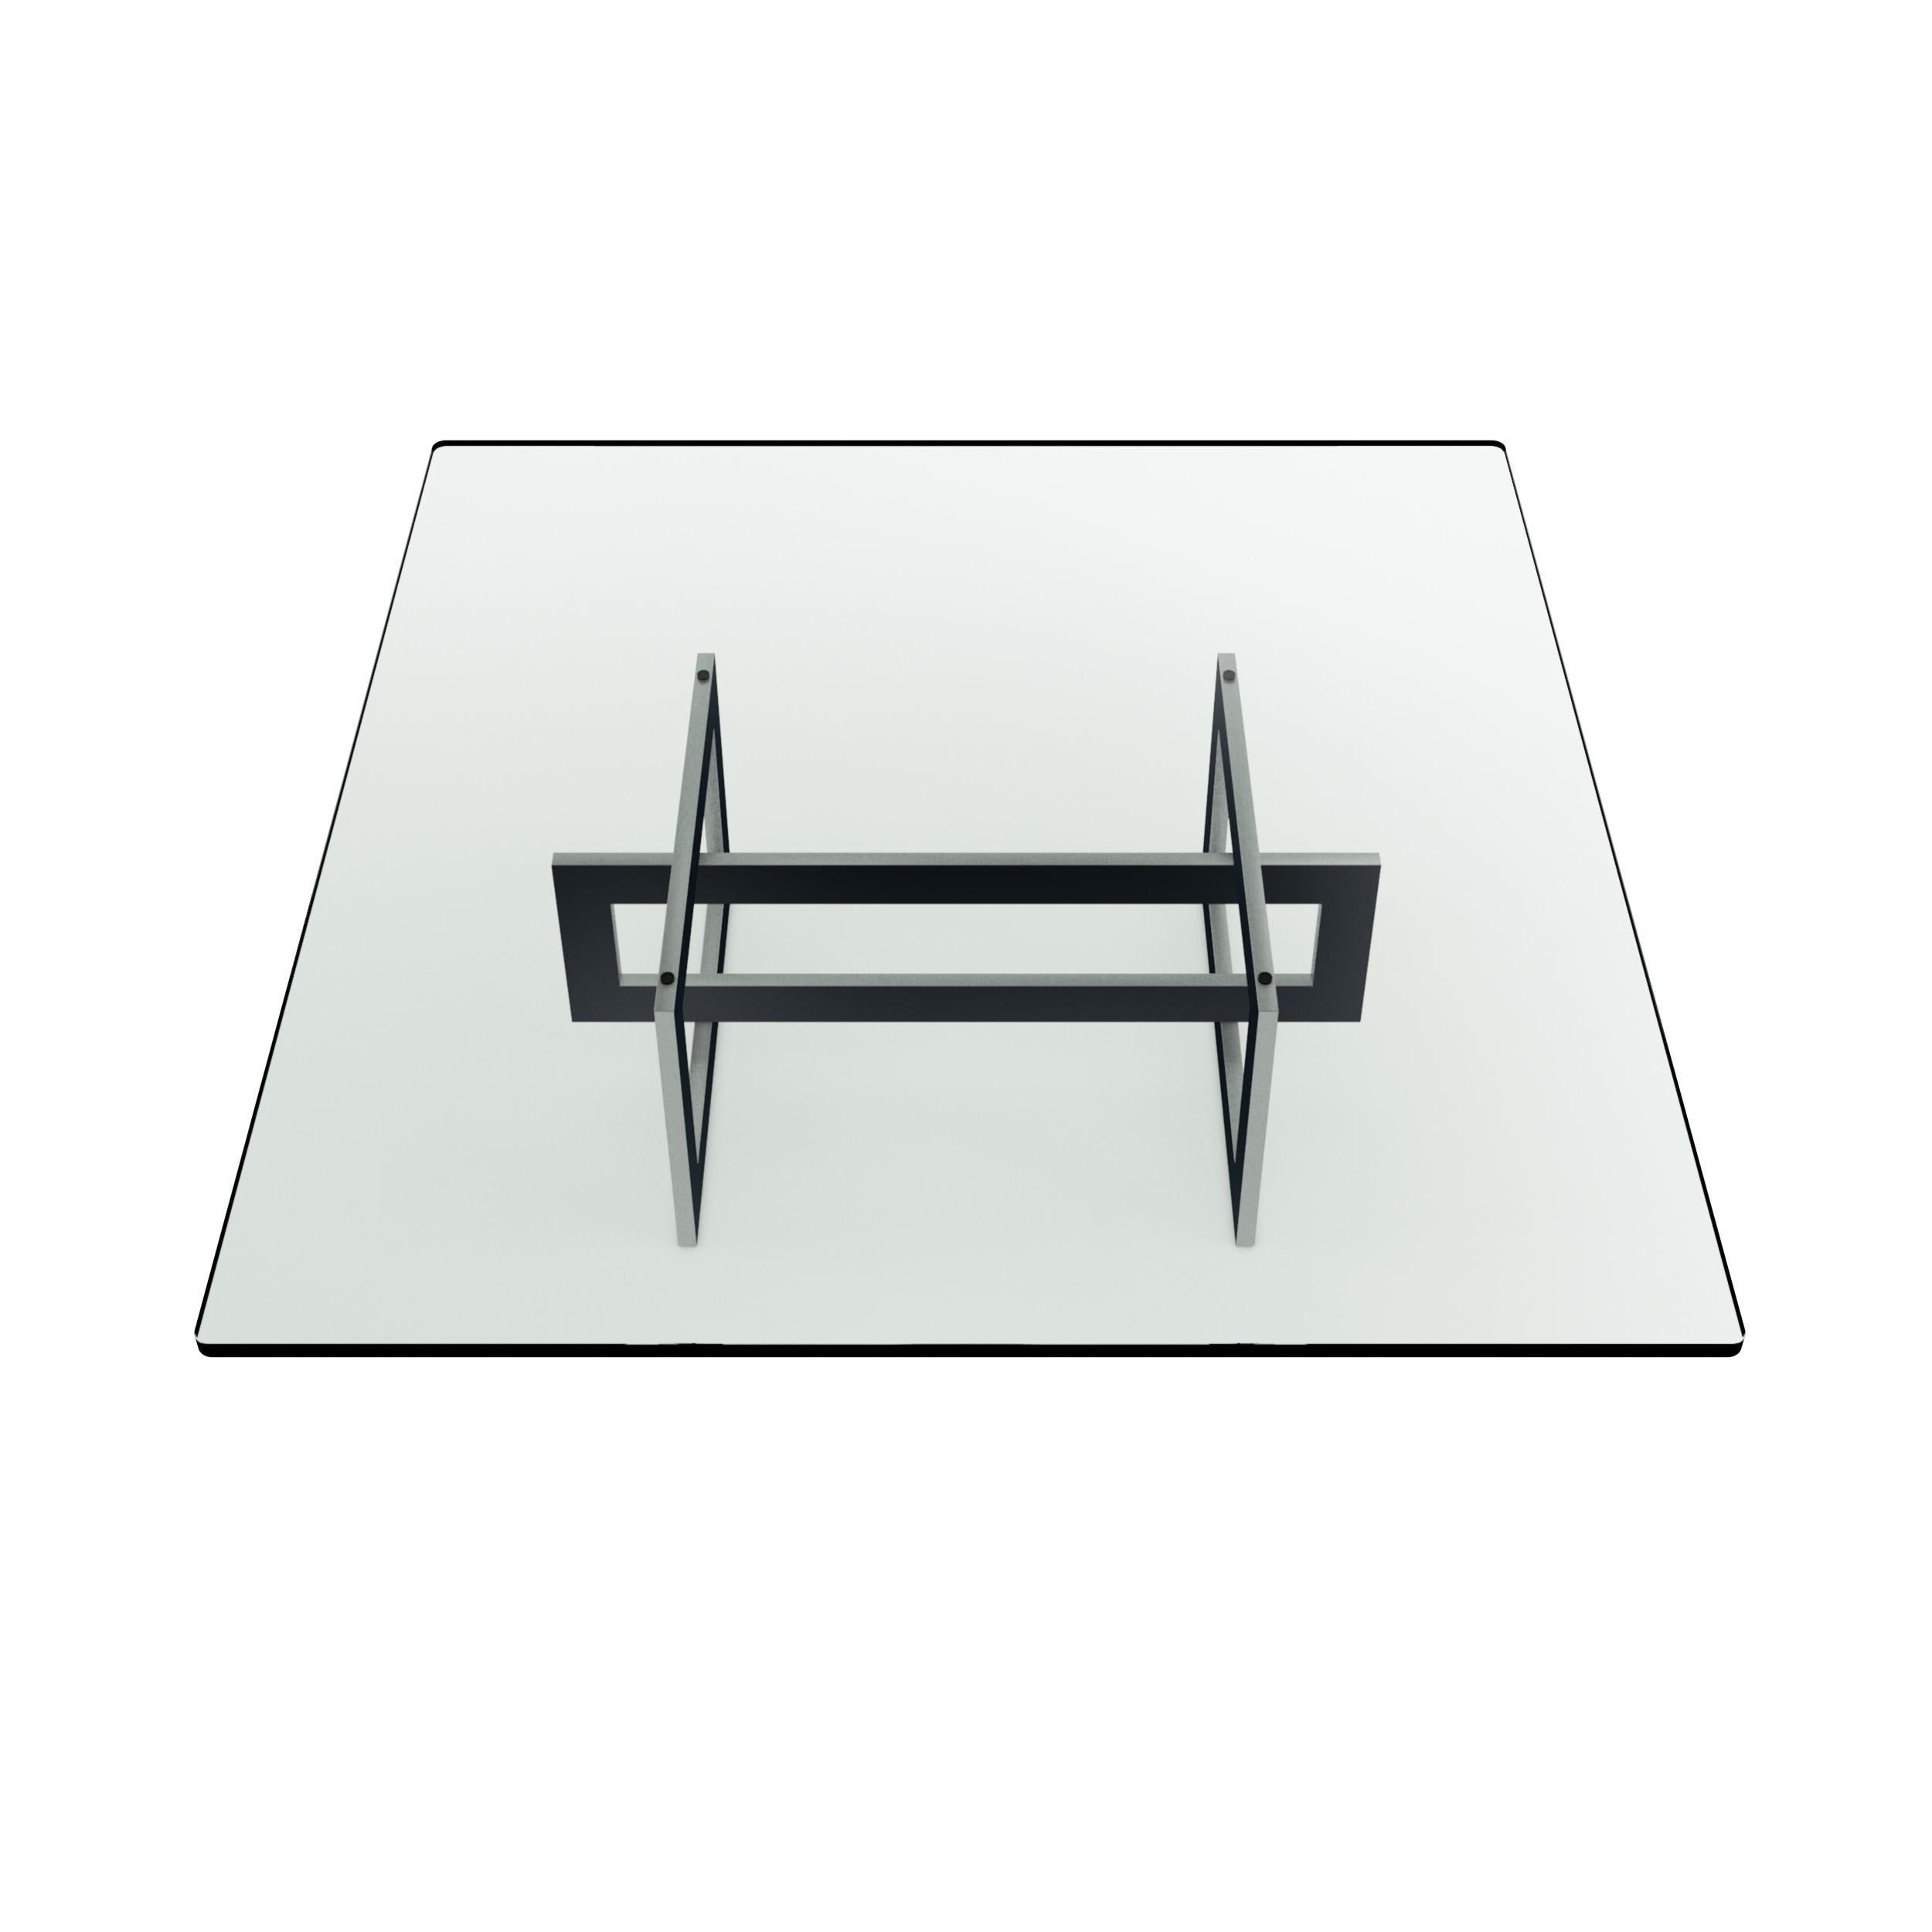 The low Jonathan table features a tubular metal 20 x 60 mm frame, epoxy coated in glossy black color with steel profiles. Variable colors for the frame upon request.
The crystal top makes possible to see the whole frame in all its peculiarity like